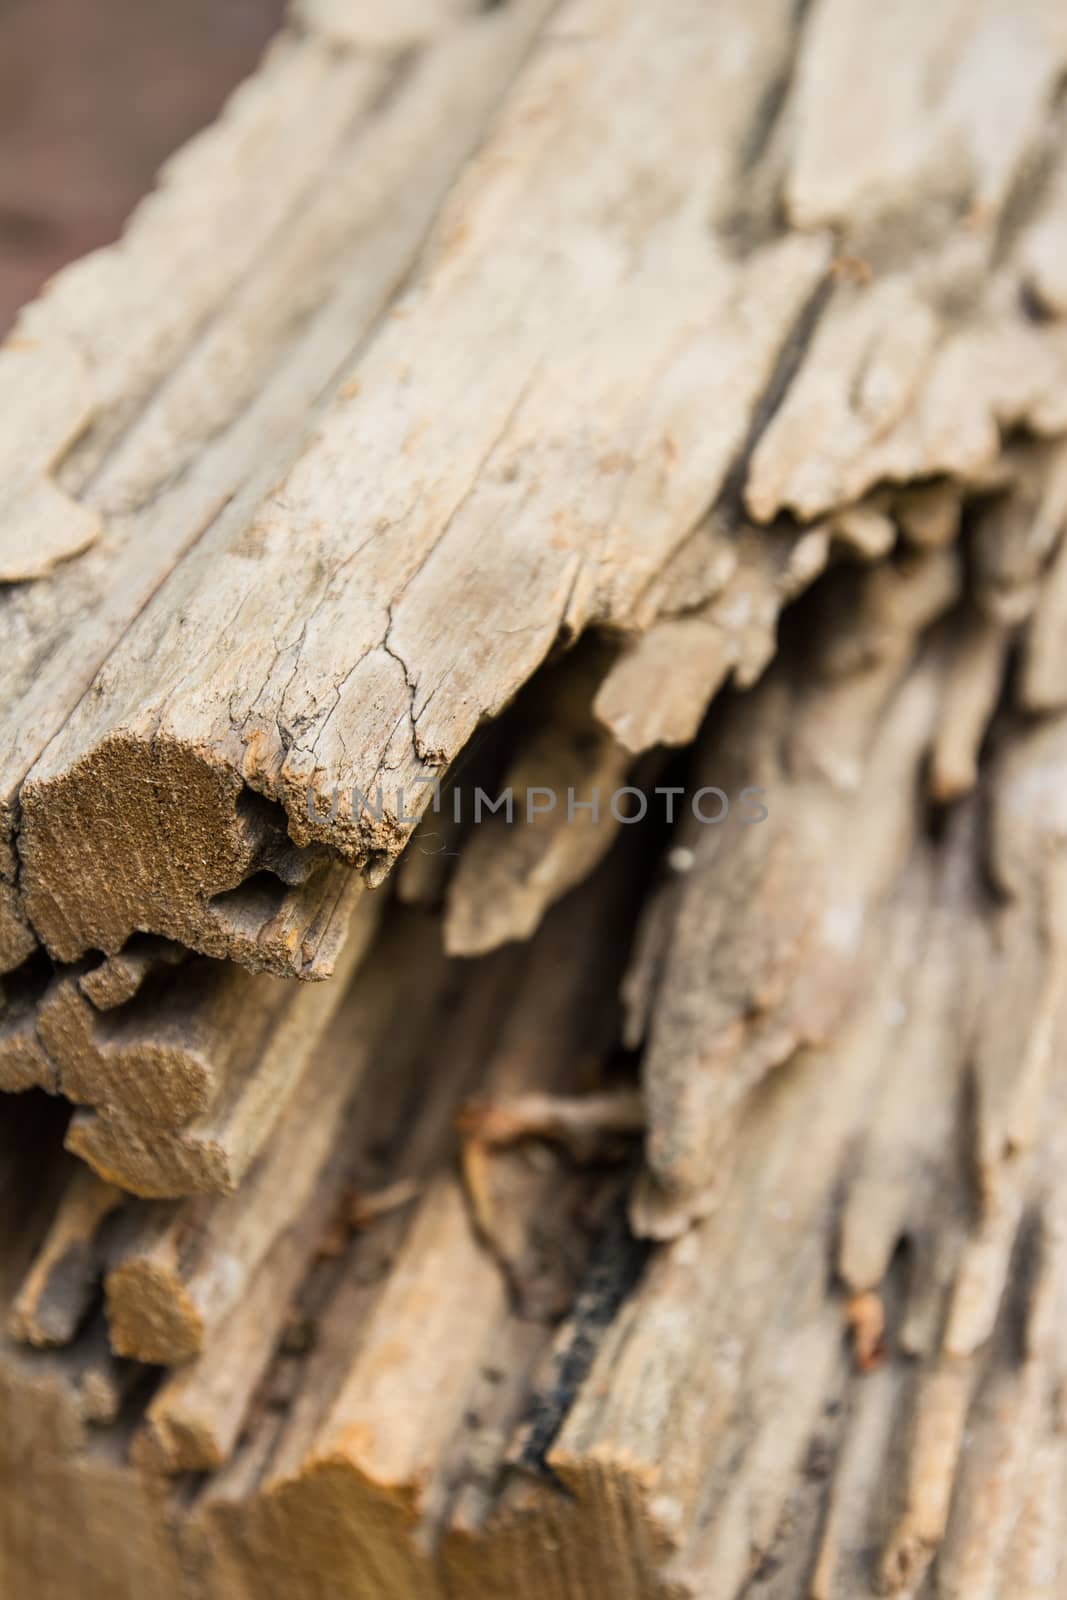 Close up view of cracked log wood